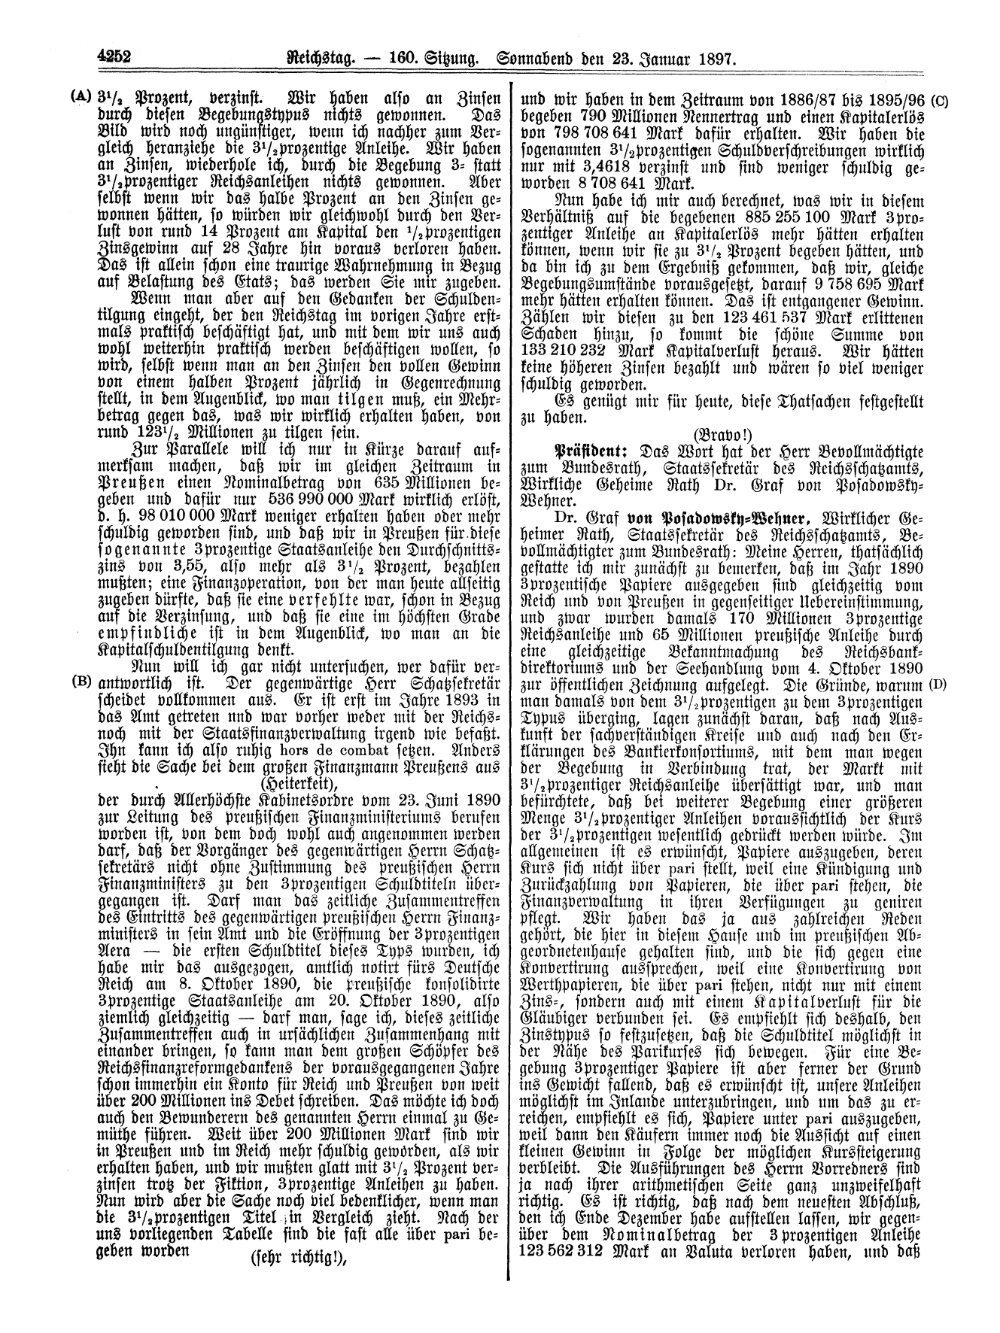 Scan of page 4252